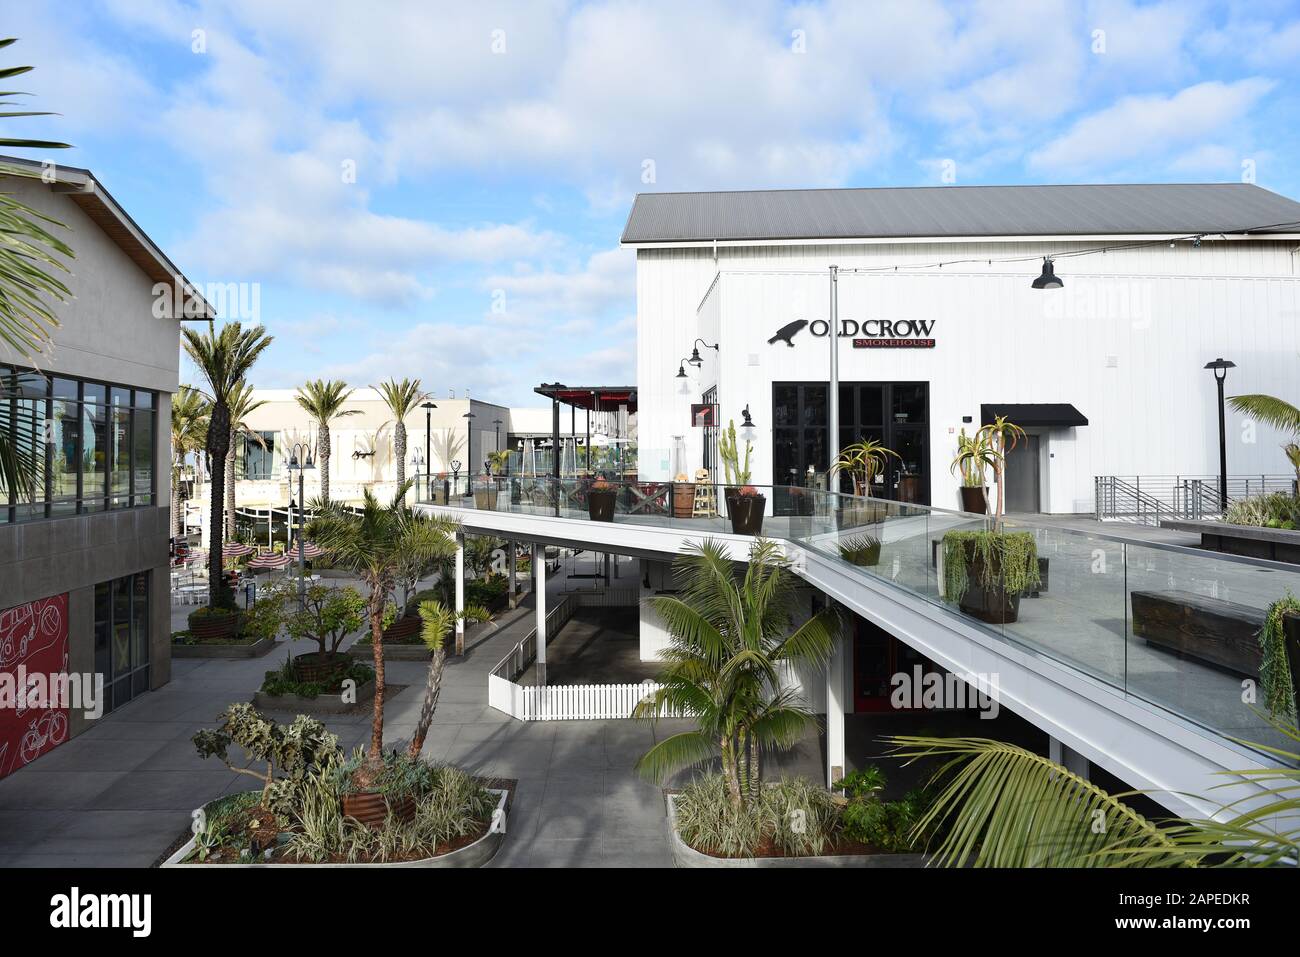 HUNTINGTON BEACH, CALIFORNIA - 22 JAN 2020: Shops and restaurants at Pacific City. The upscale development is on the Pacific Coast Highway. Stock Photo